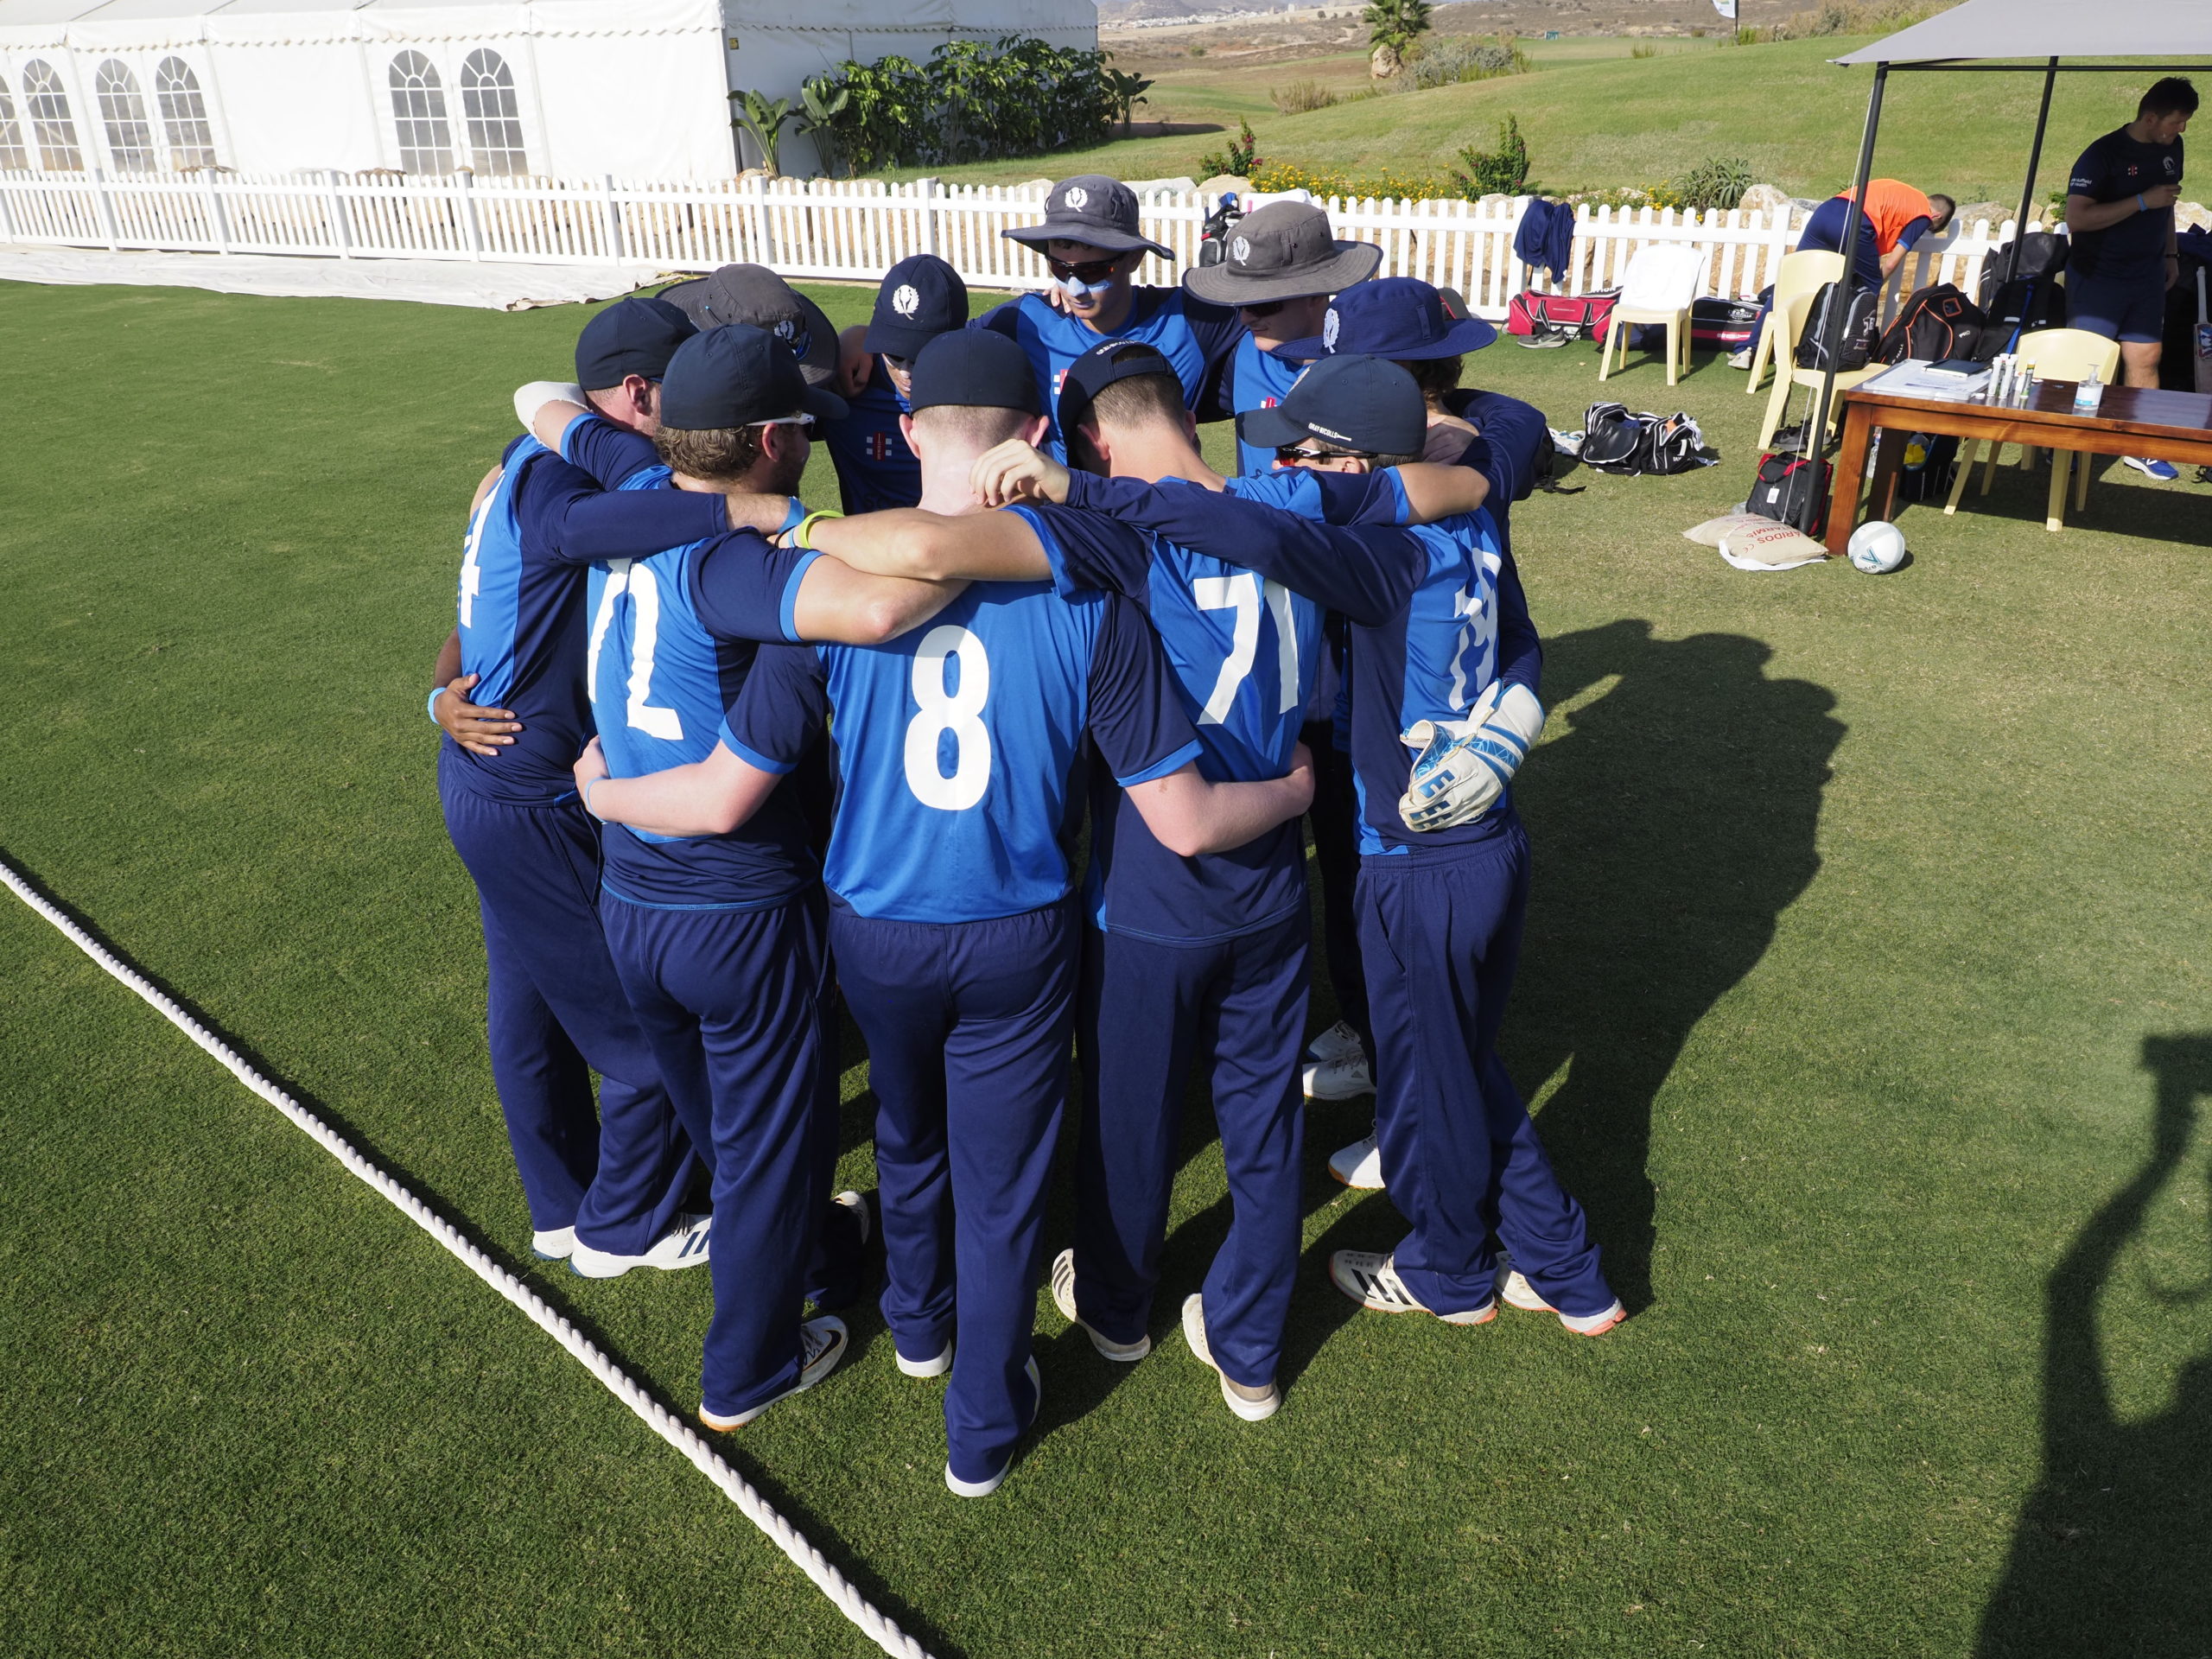 Scotland to play in ICC U19 Men’s Cricket World Cup following NZ withdrawal